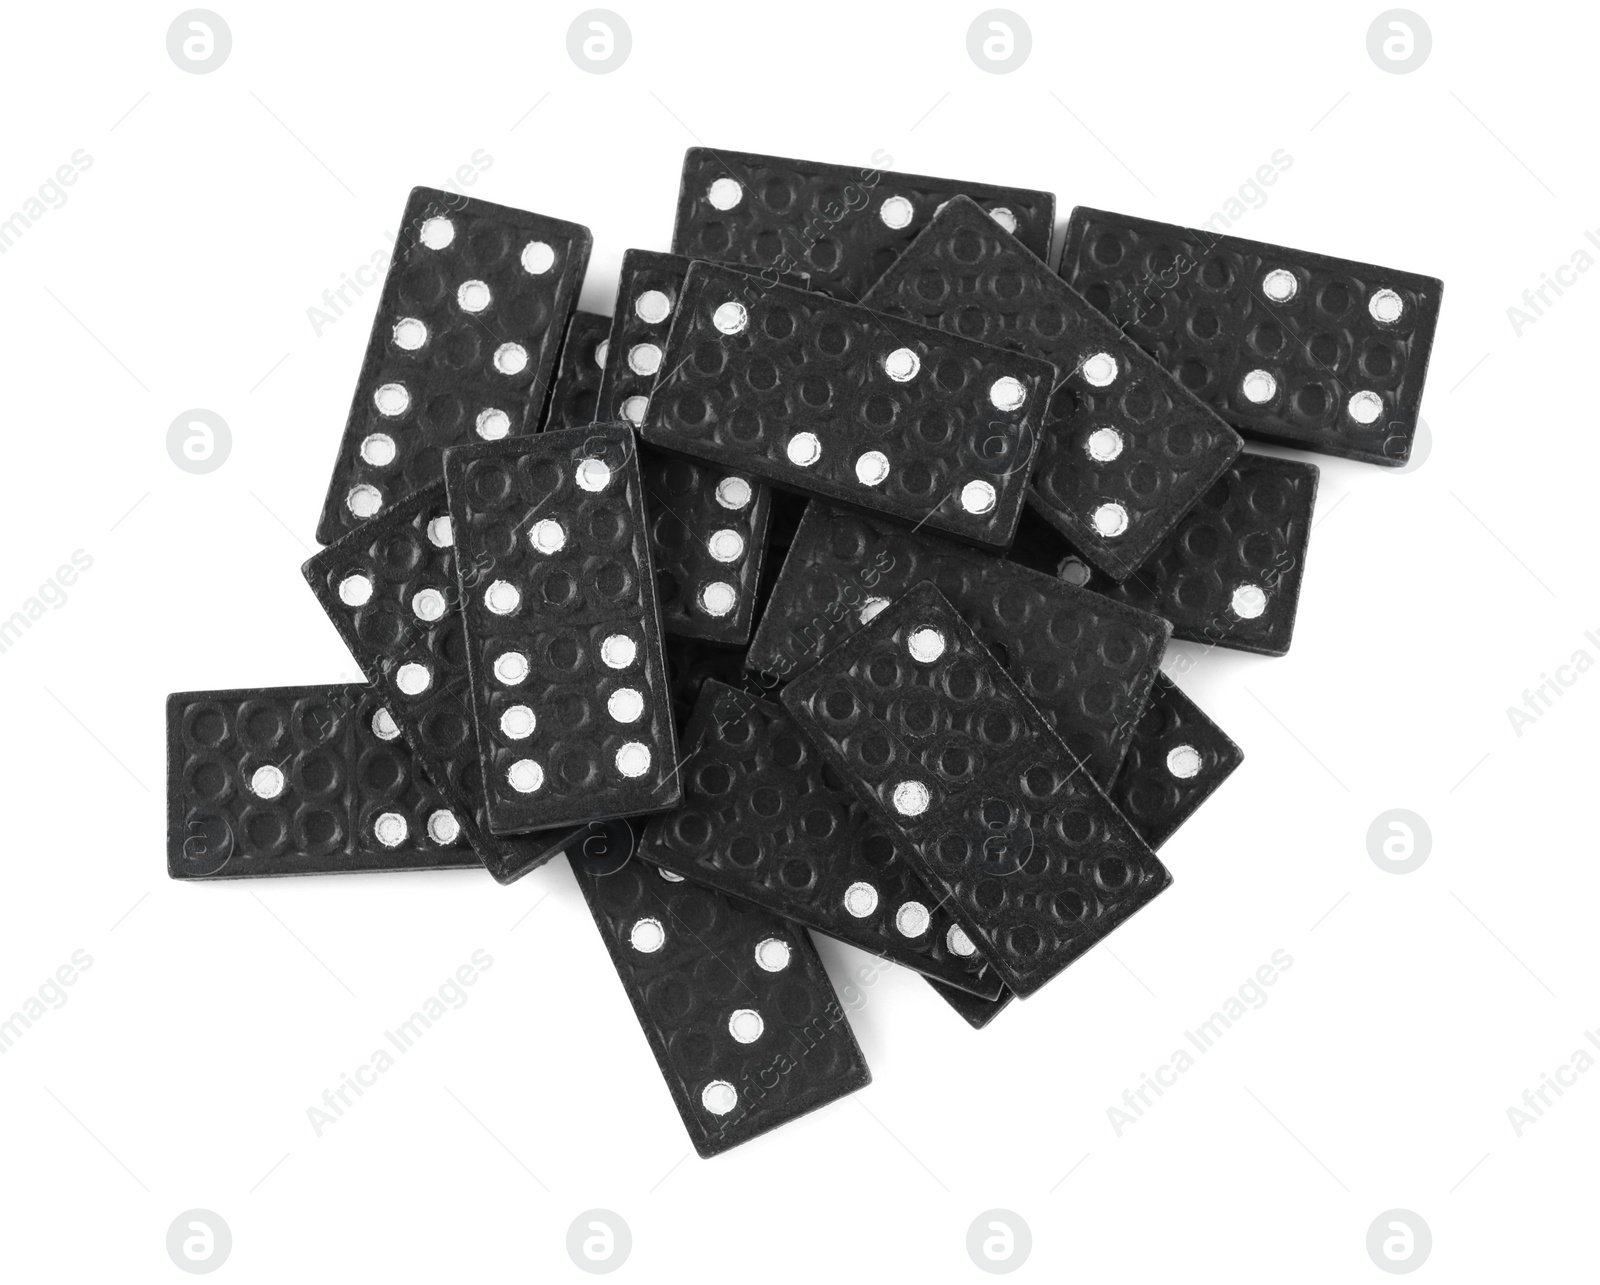 Photo of Pile of black domino tiles on white background, top view